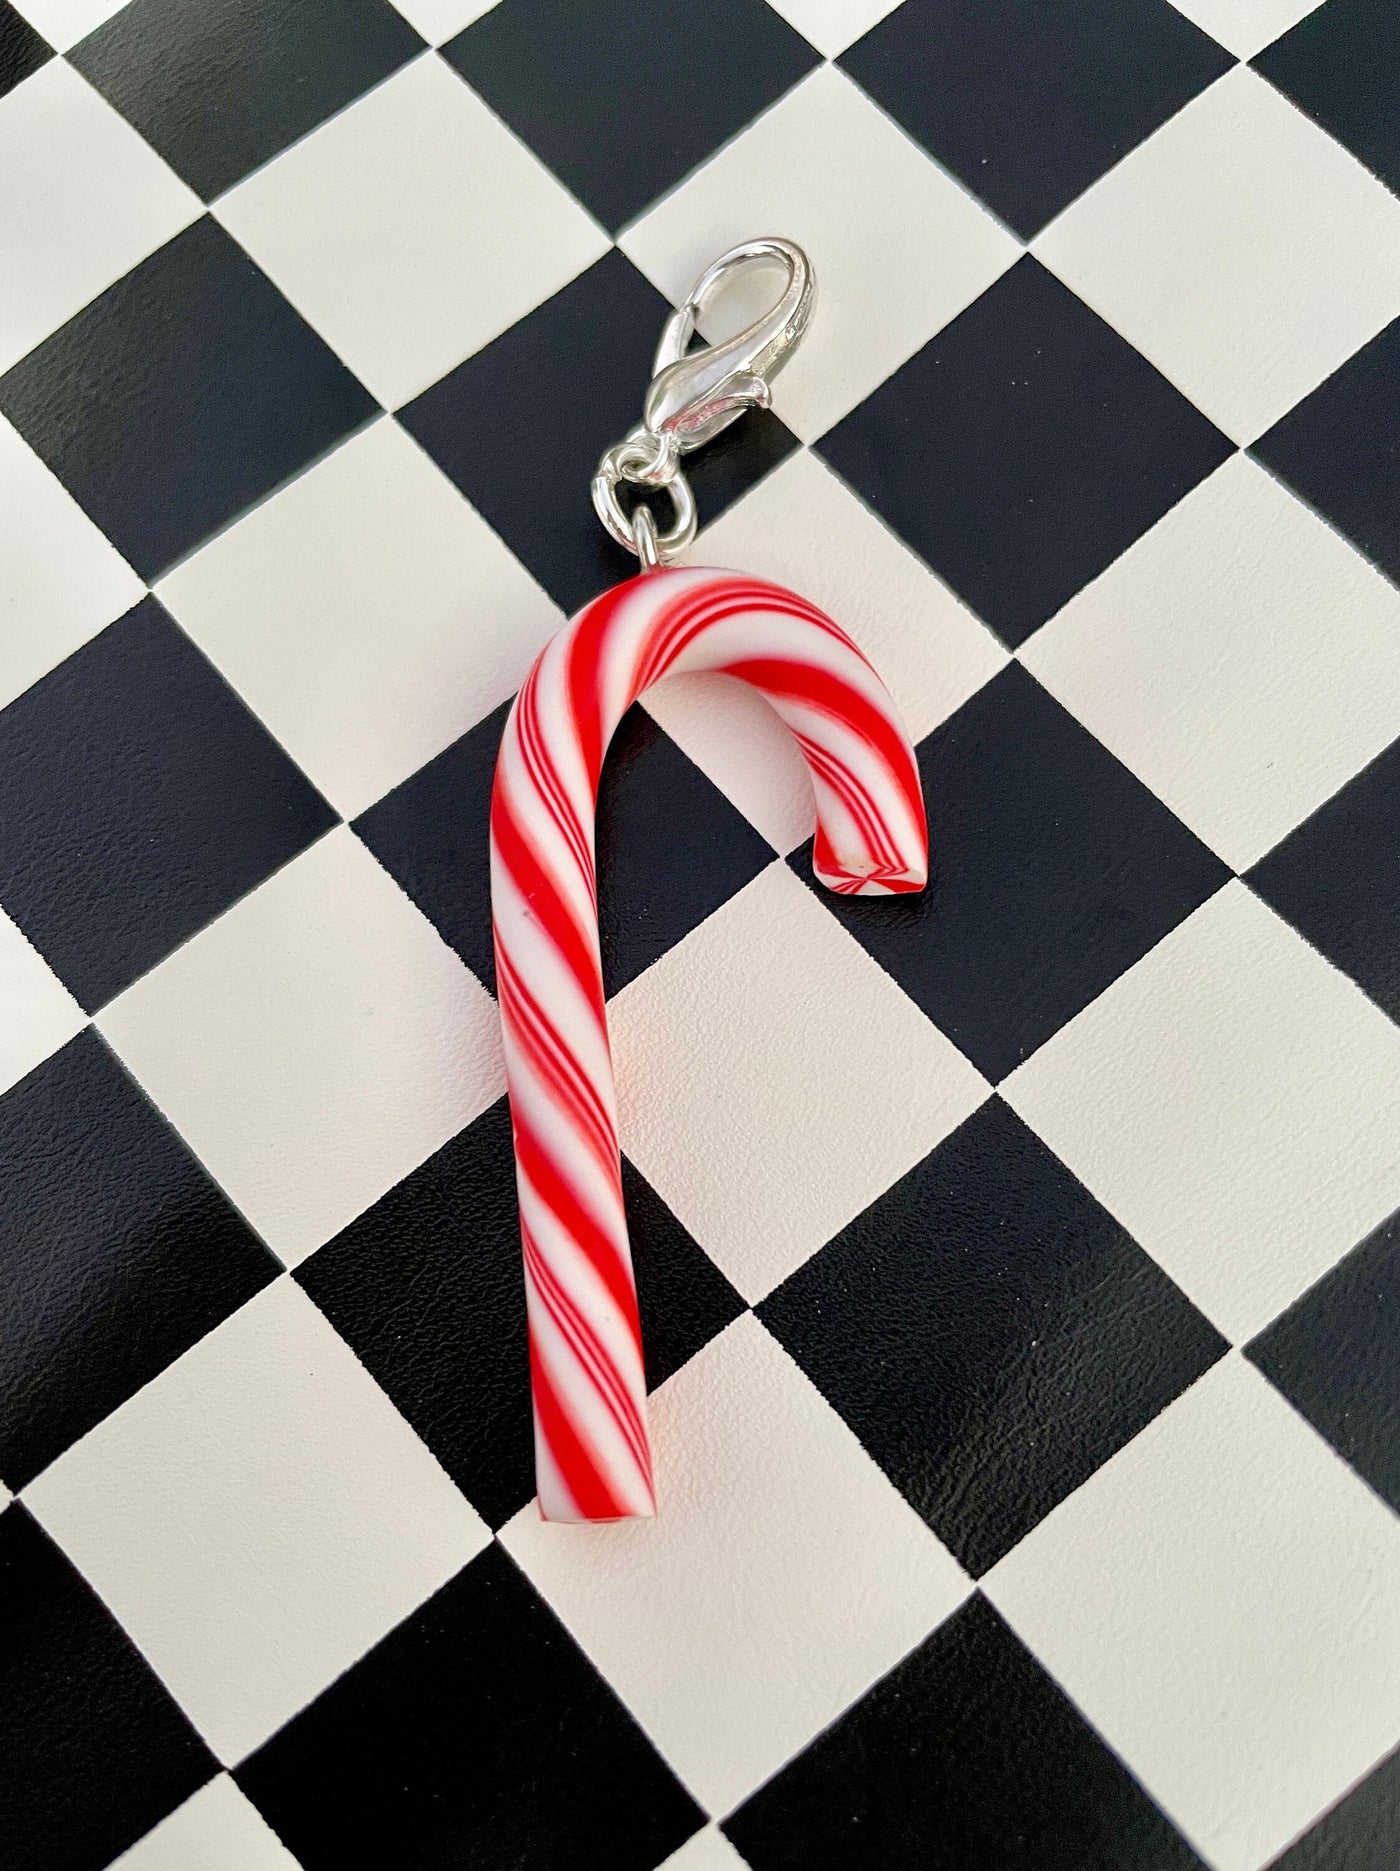 Extra Large Red and White Candy Cane Roller Skate Charm  - Shoe charm, Zipper pull, Bag charm